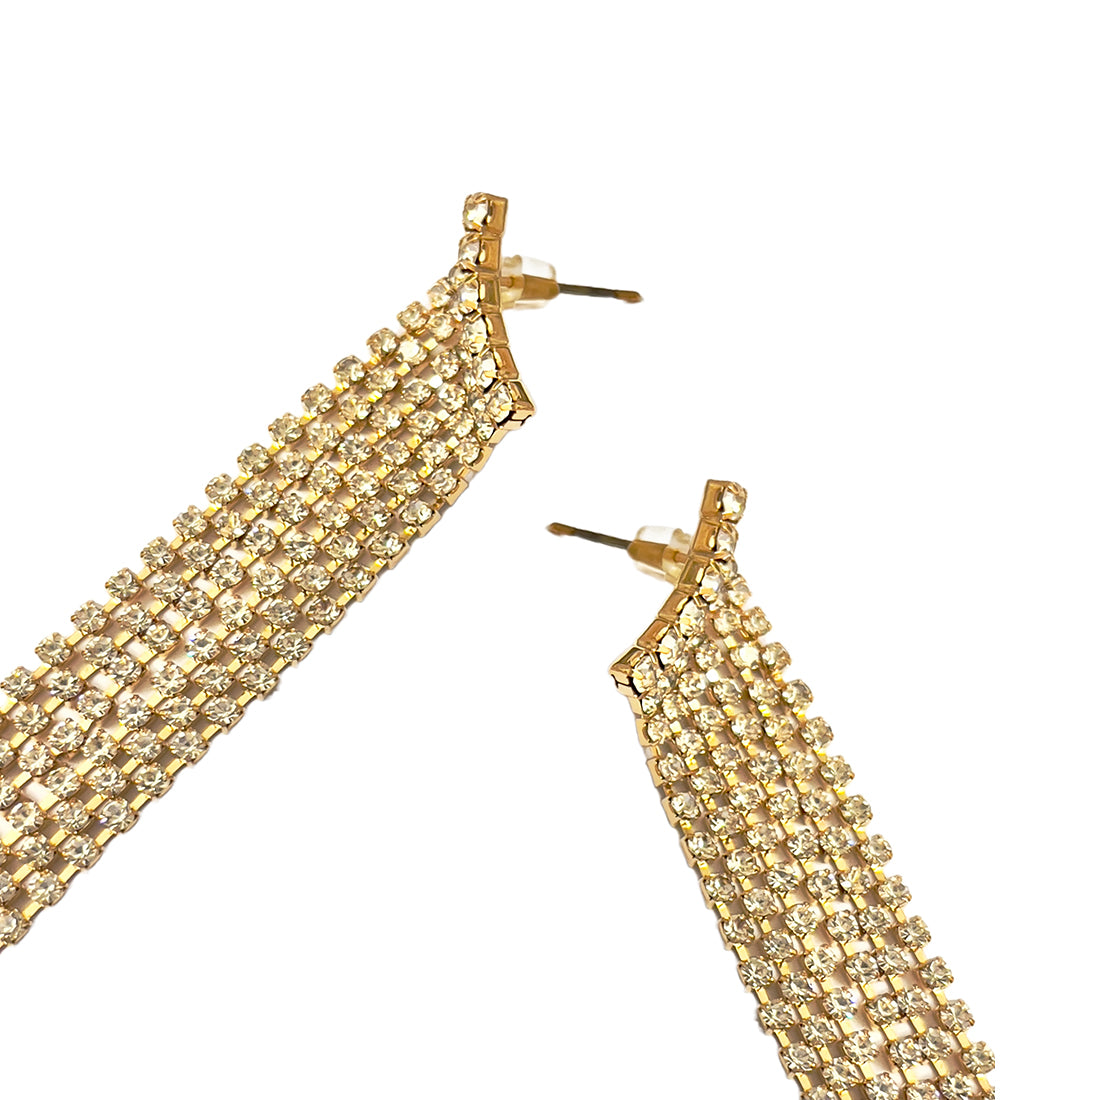 Contemporary White Diamante Crystal Studded Gold-Toned Asymmetric Long Tassel Drop Earrings